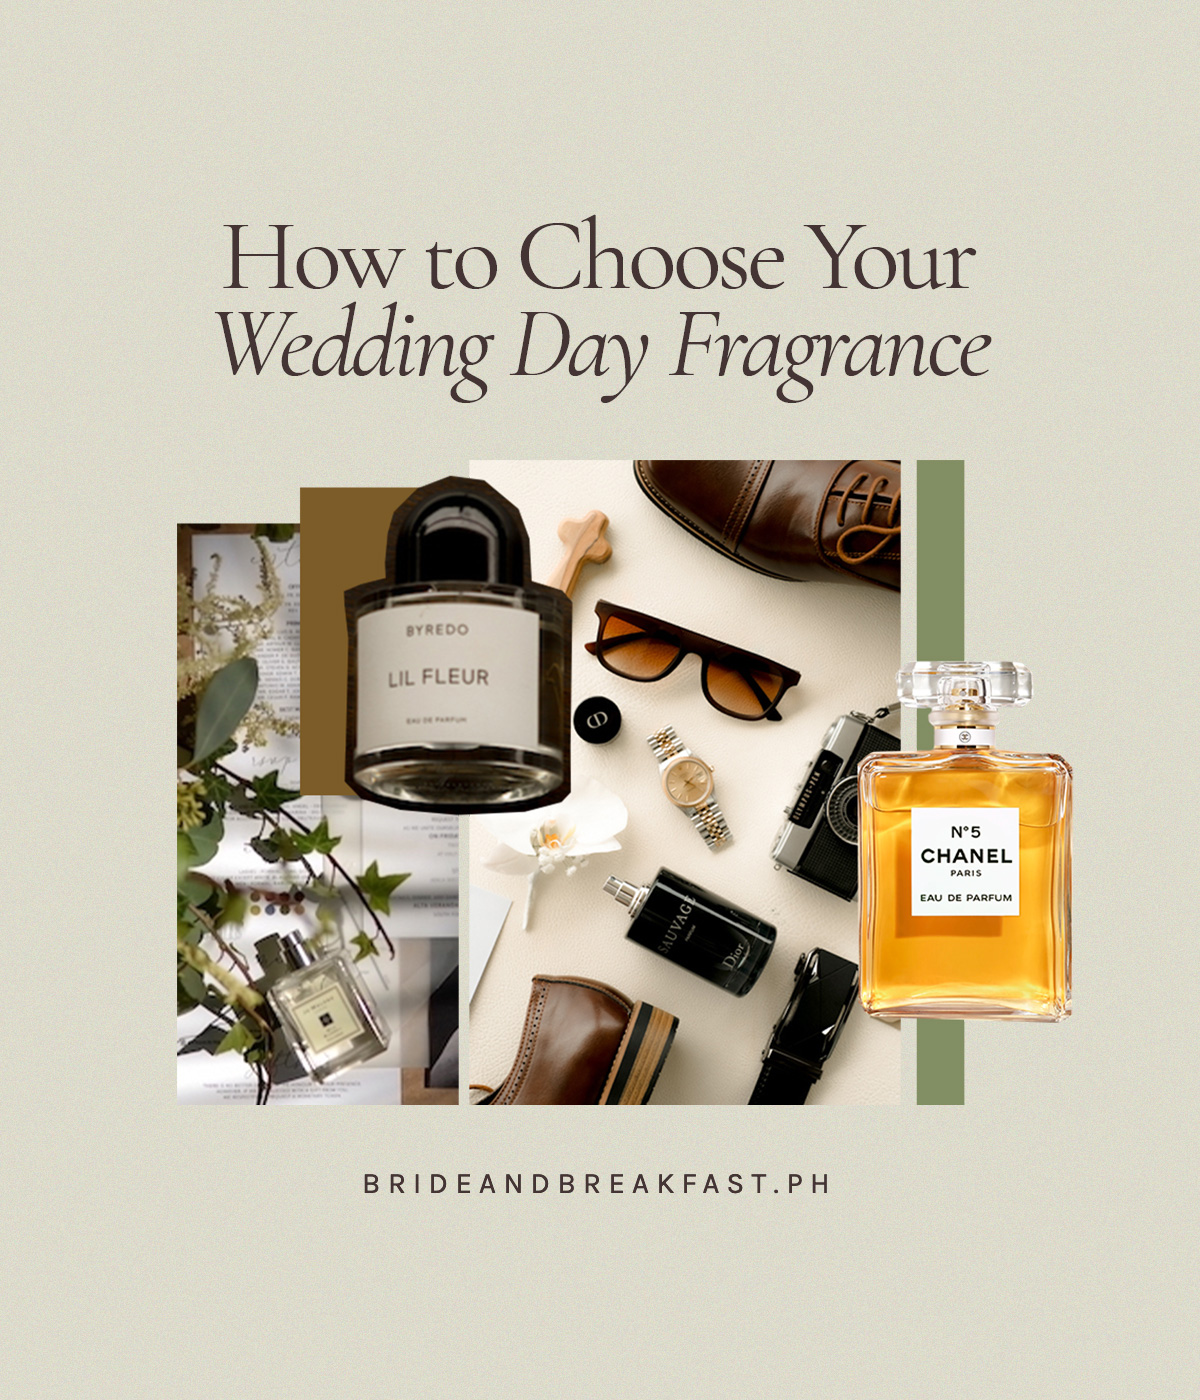 How to Choose Your Wedding Day Fragrance